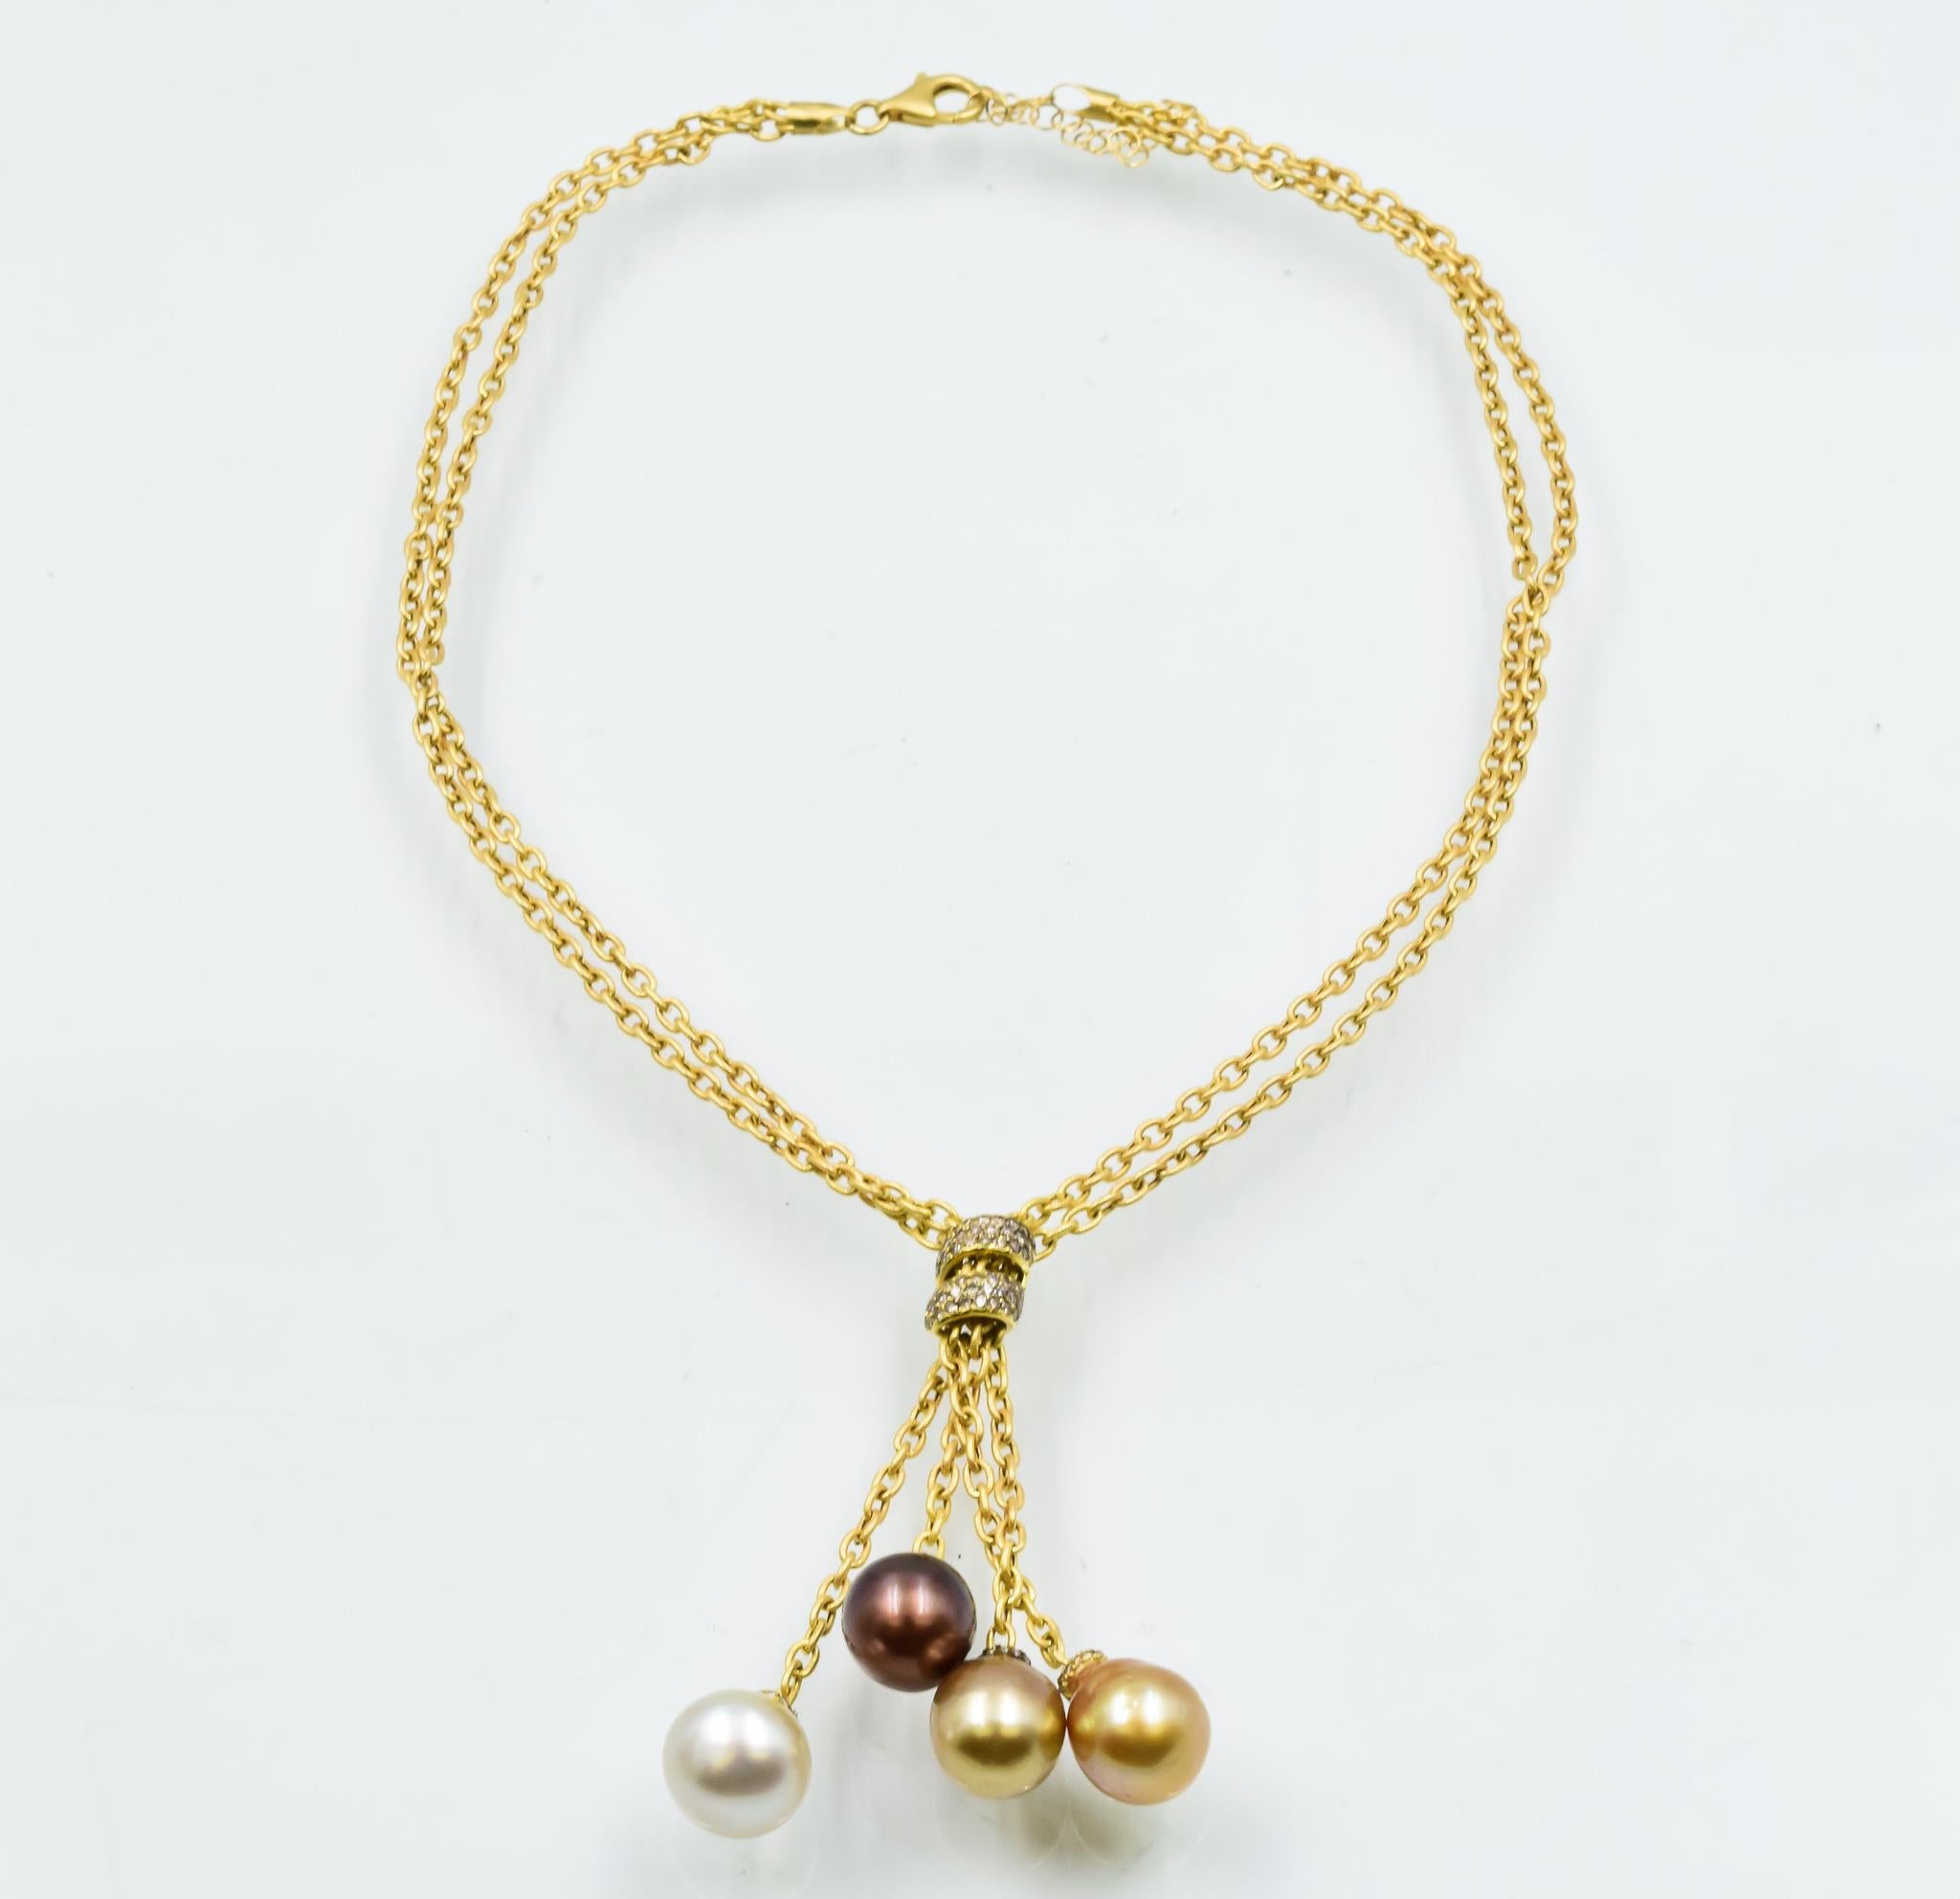 Yvel Necklace in 18 Karat Yellow Gold with Pearls and Champagne Diamonds 2